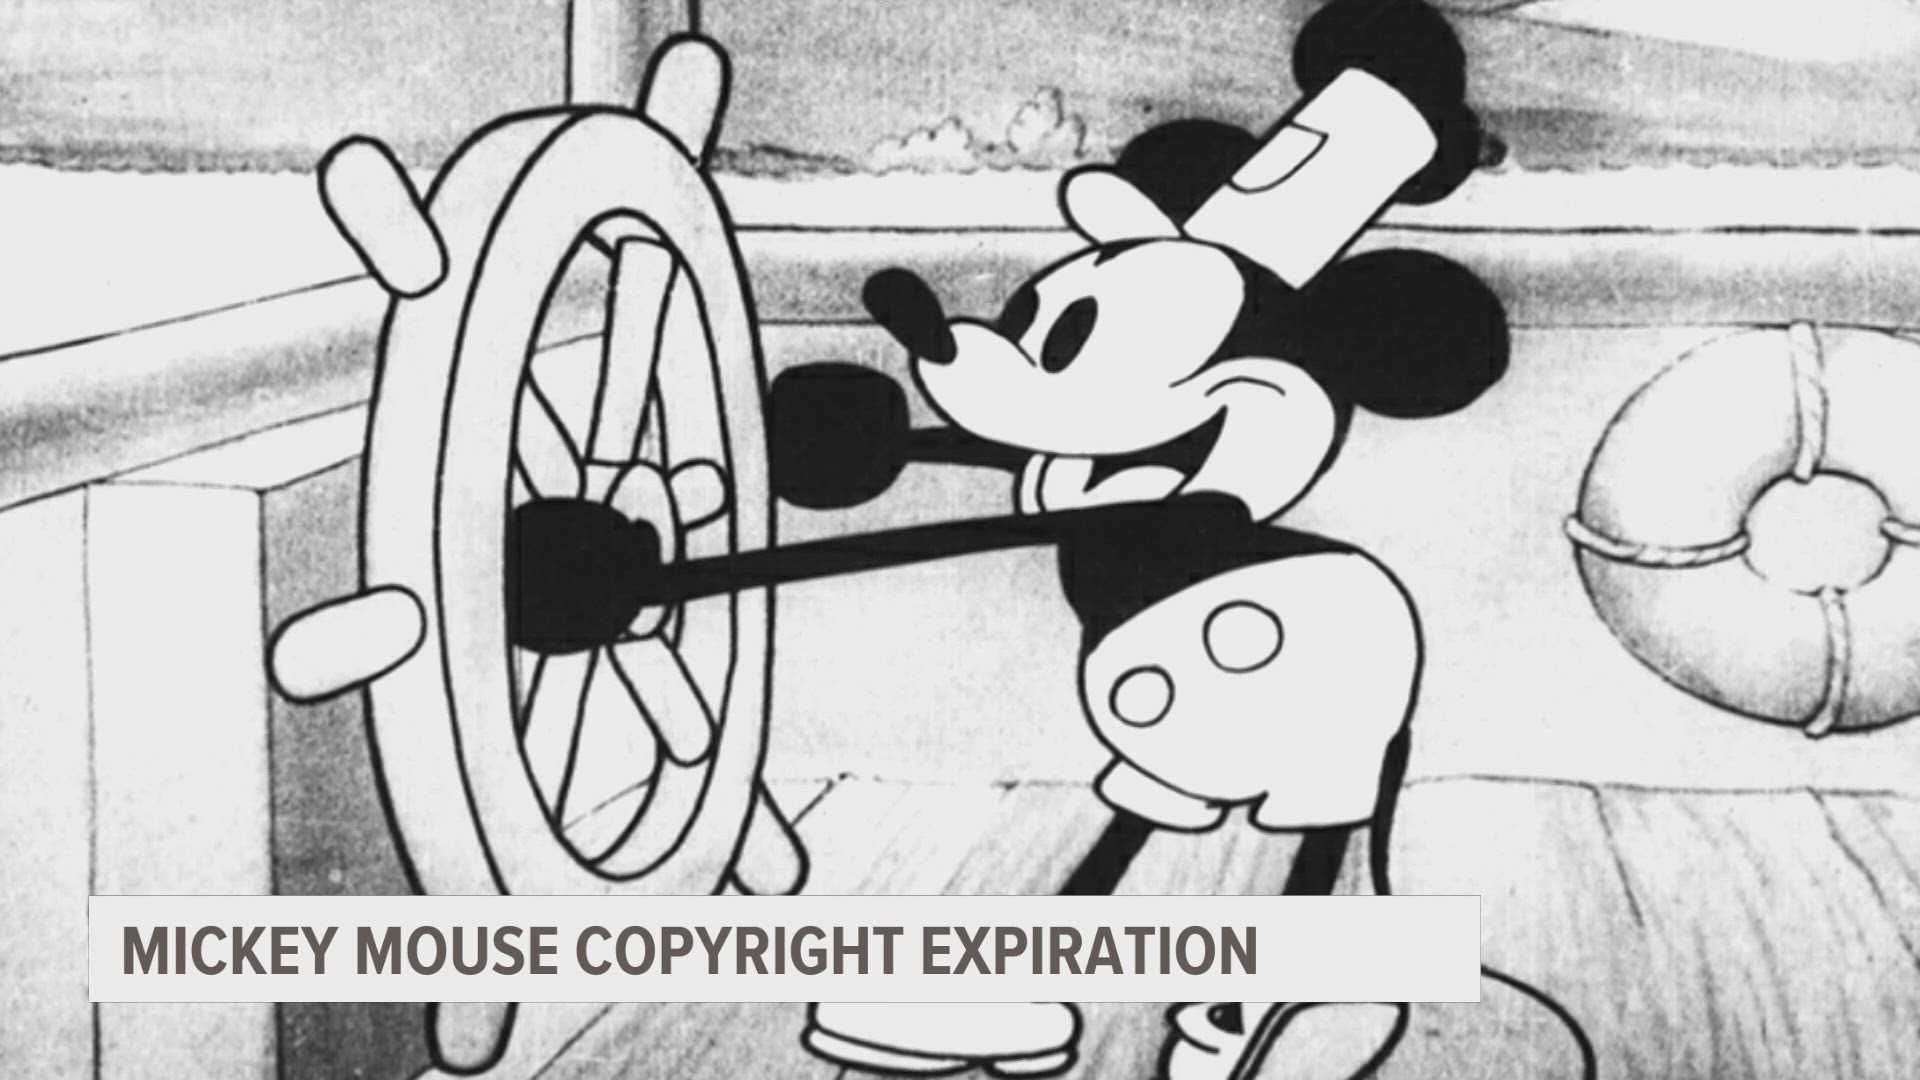 This new development only applies to the "Staemboat Willie" version of Mickey Mouse, while more modern versions will remain under Disney's copyright.